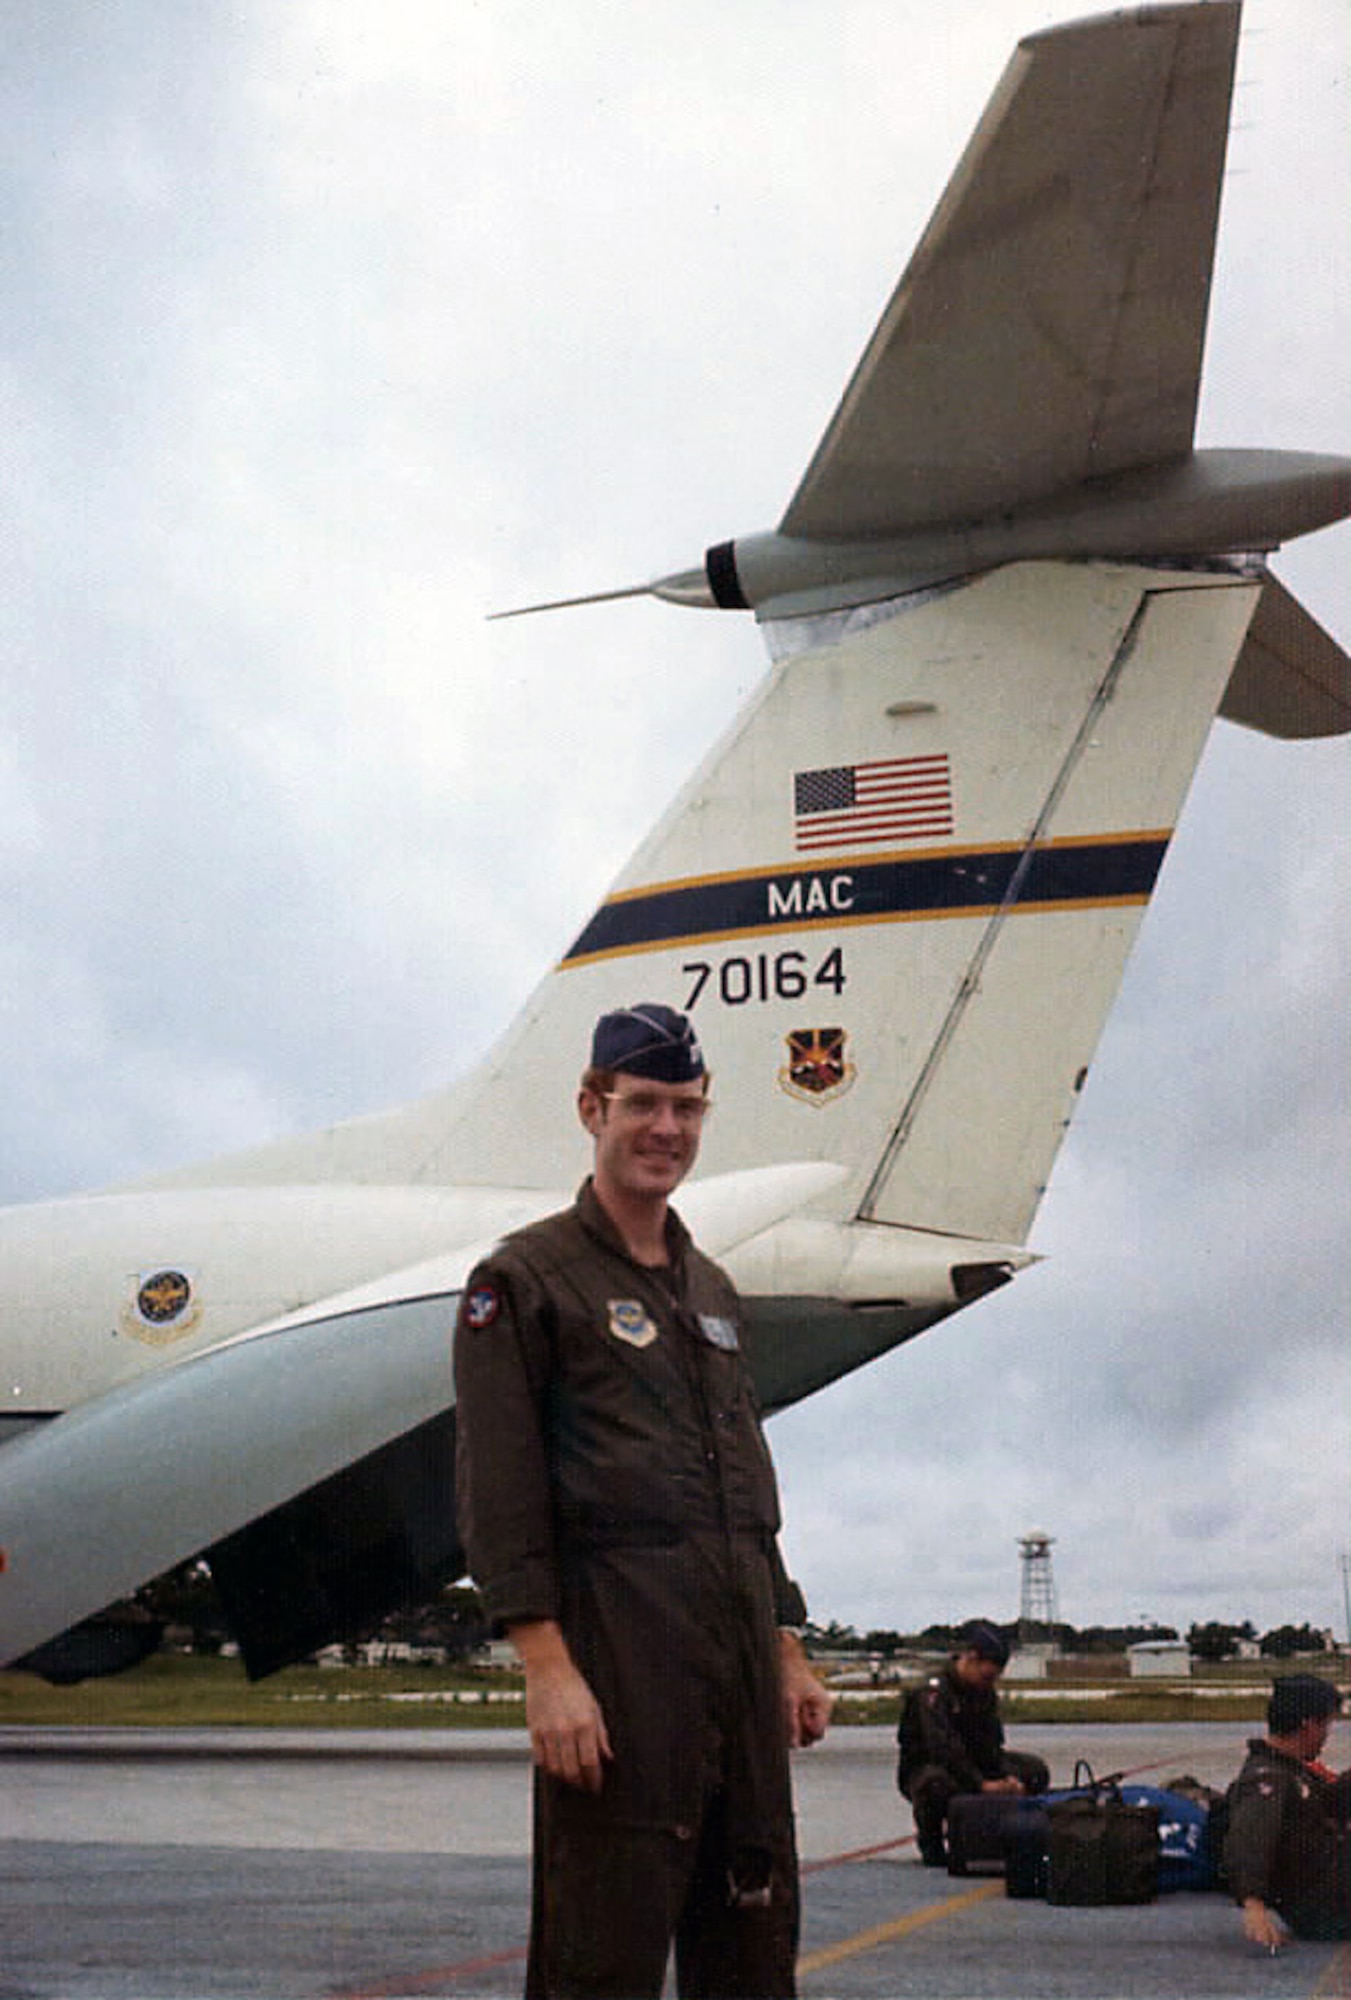 Capt. Robert Allen, 62nd Airlift Wing historian, poses for a photo in front of a C-141A aircraft in 1974 at Kadena Air Force Base, Japan. Allen flew as a navigator in the 4th Airlift Squadron from 1973-1976. (Courtesy photo)  